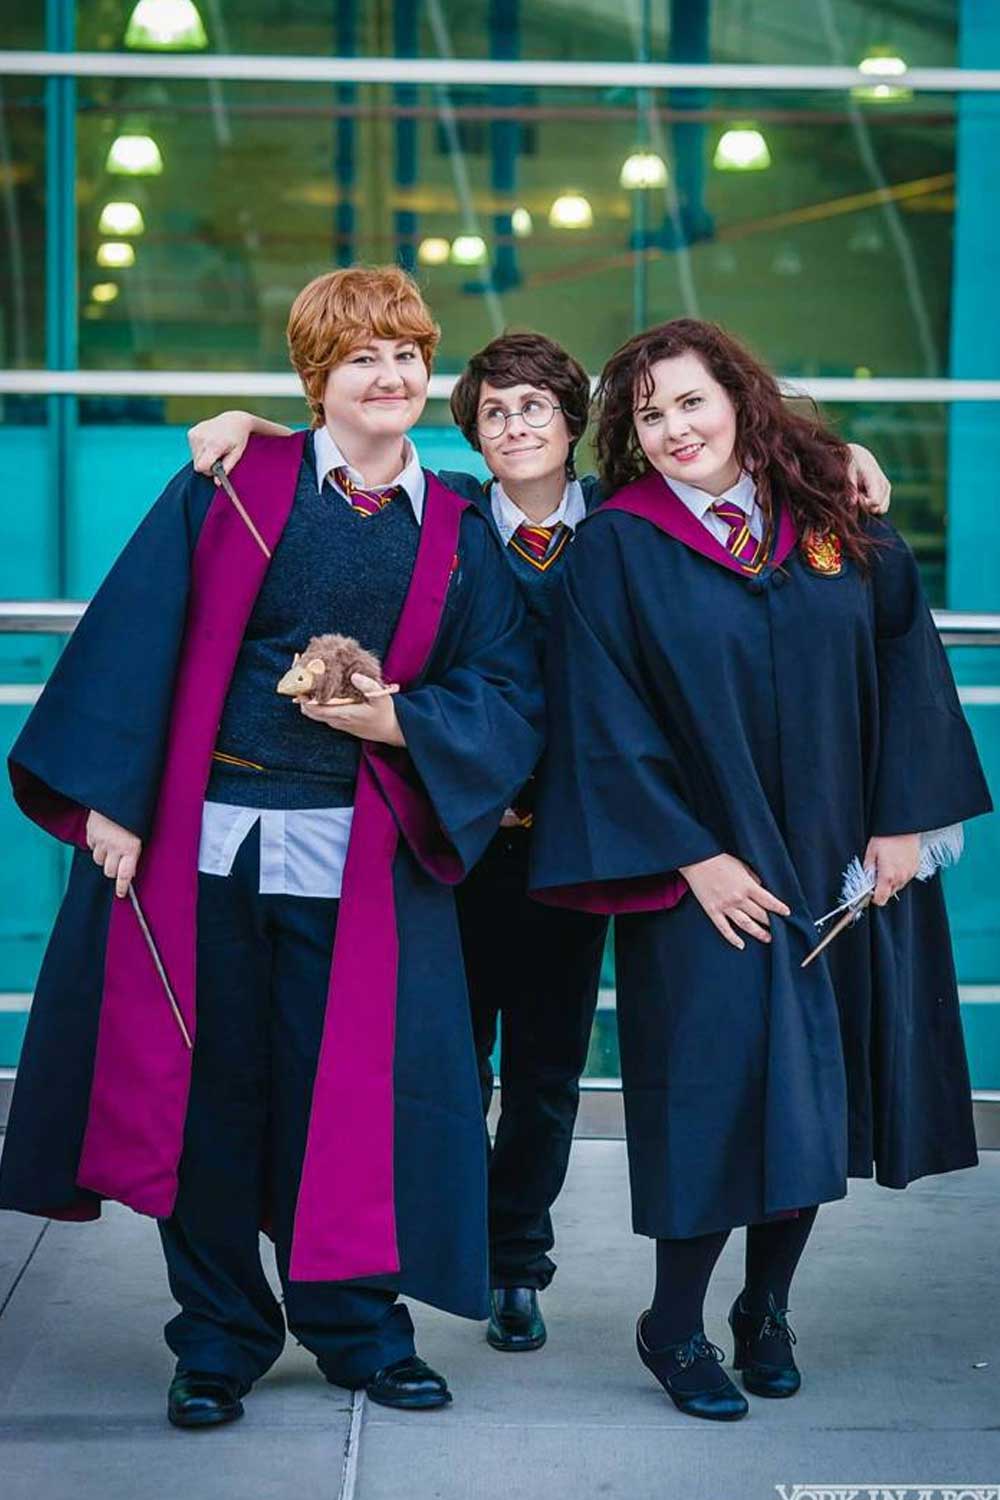 Harry Potter Theme Halloween Costumes for Friends